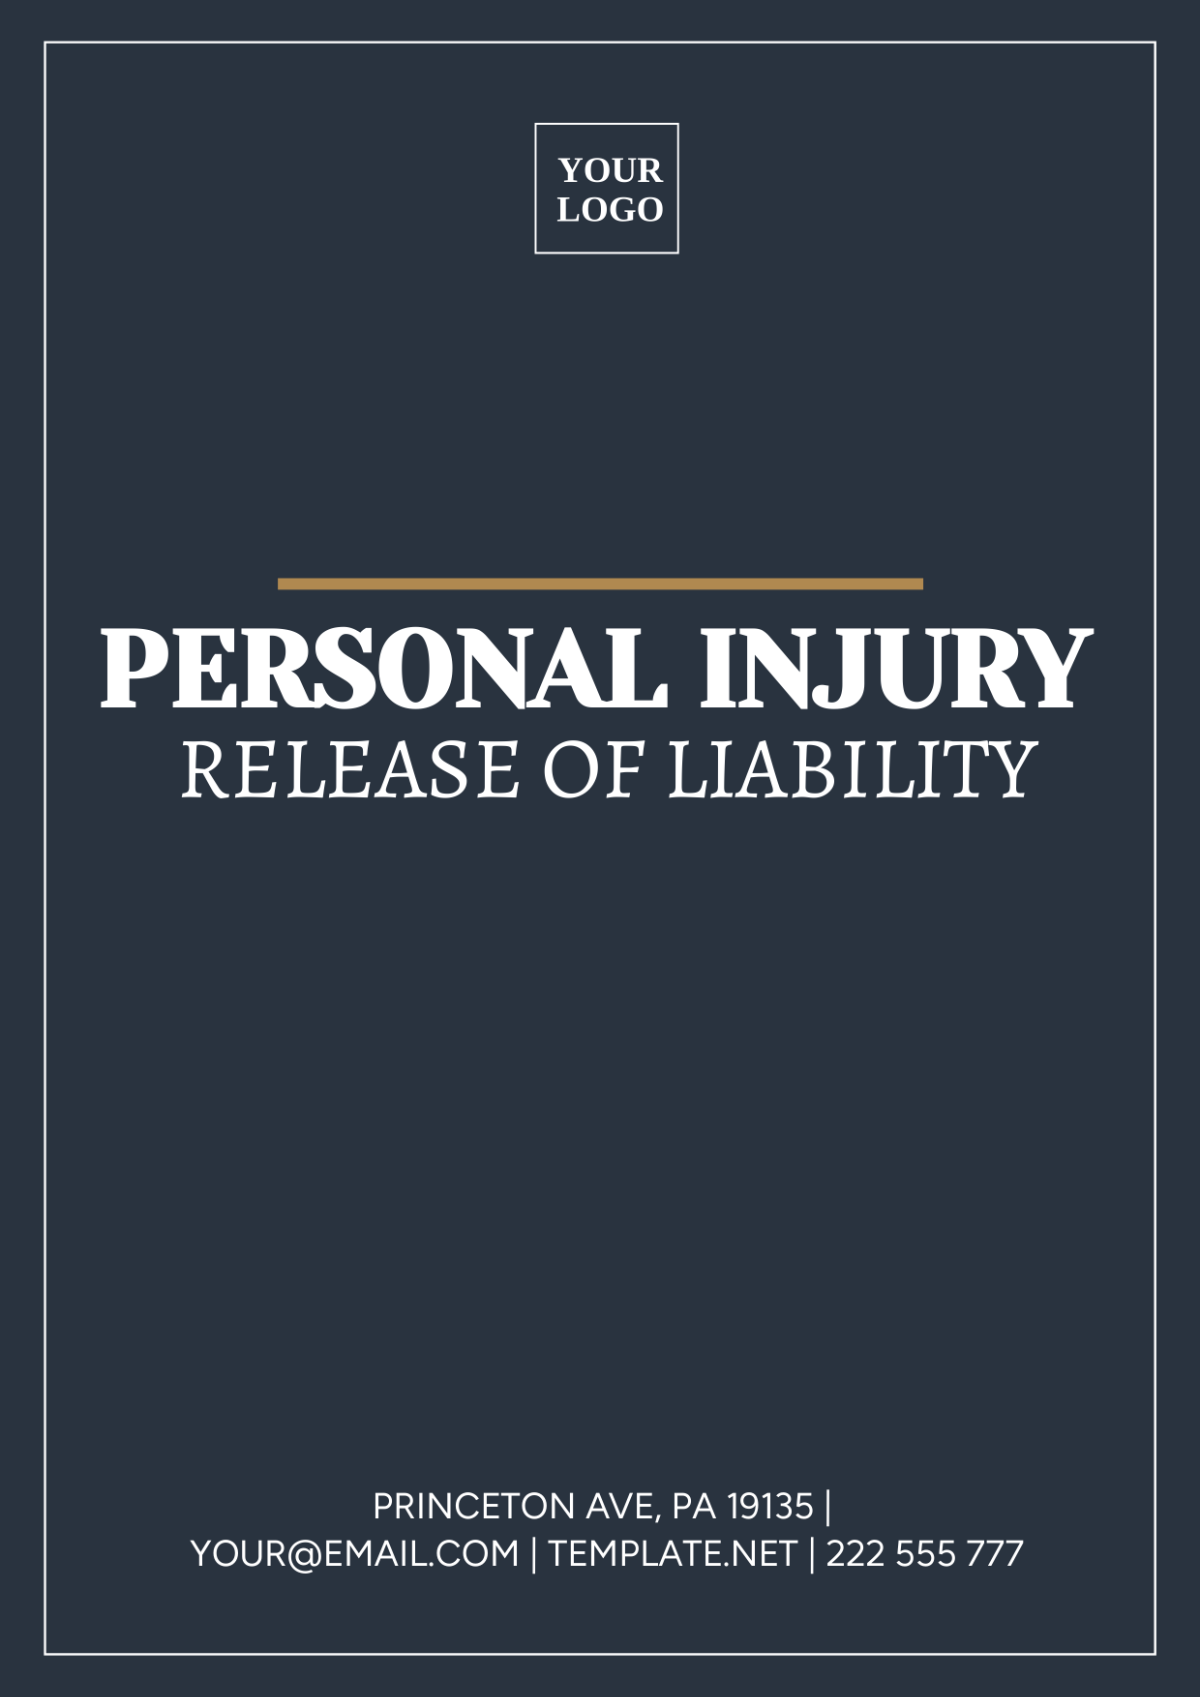 Personal Injury Release of Liability Template